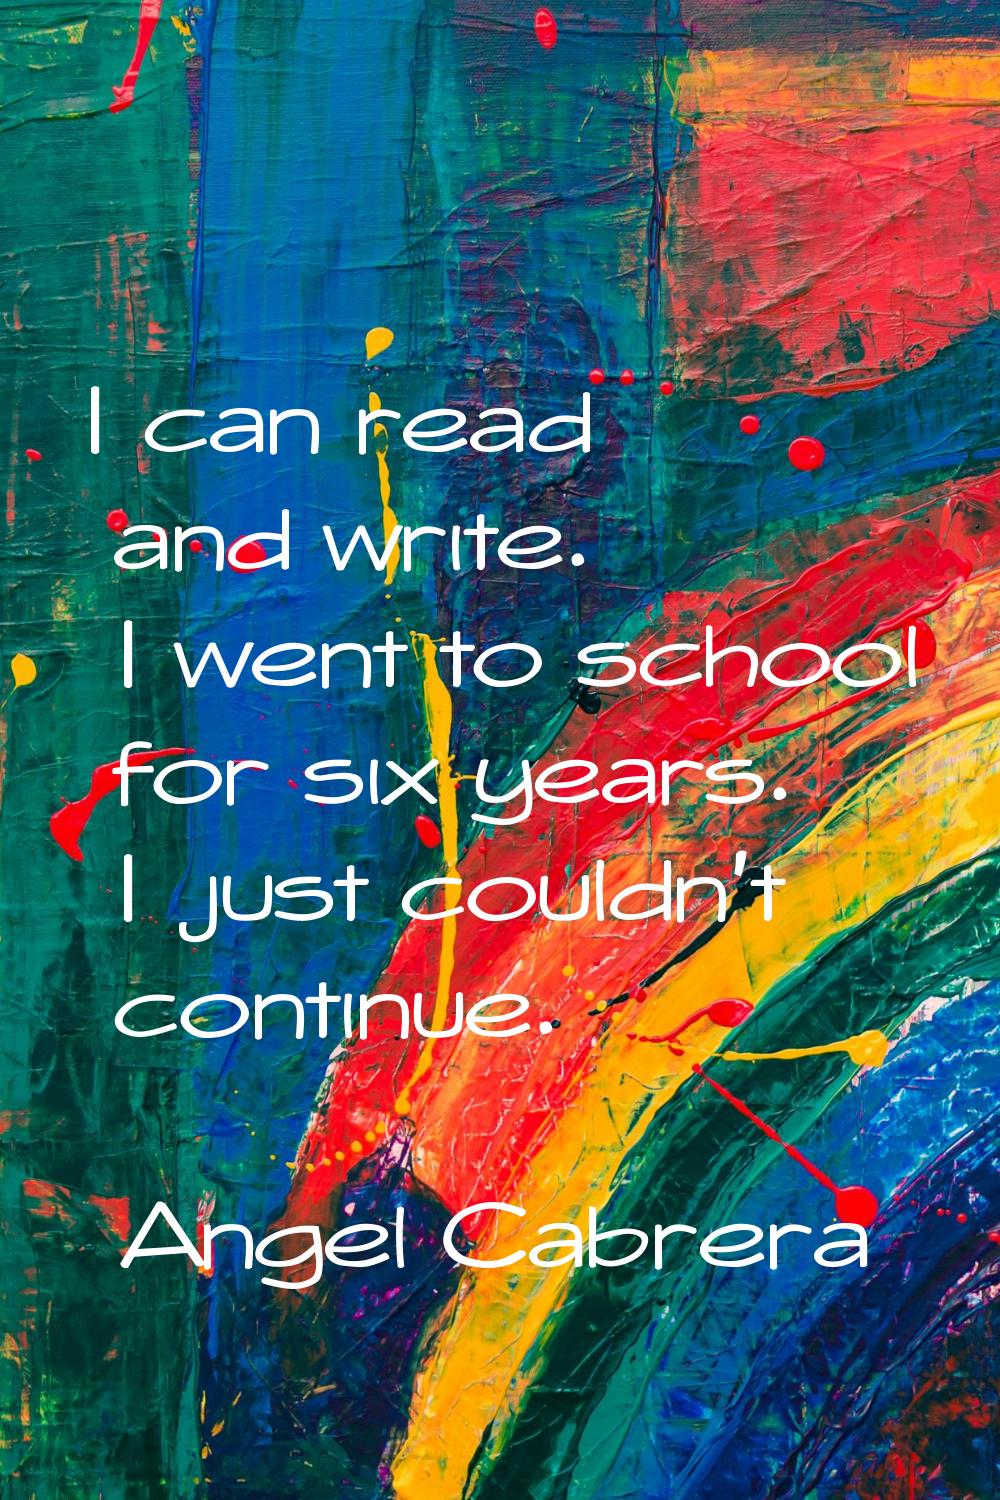 I can read and write. I went to school for six years. I just couldn't continue.